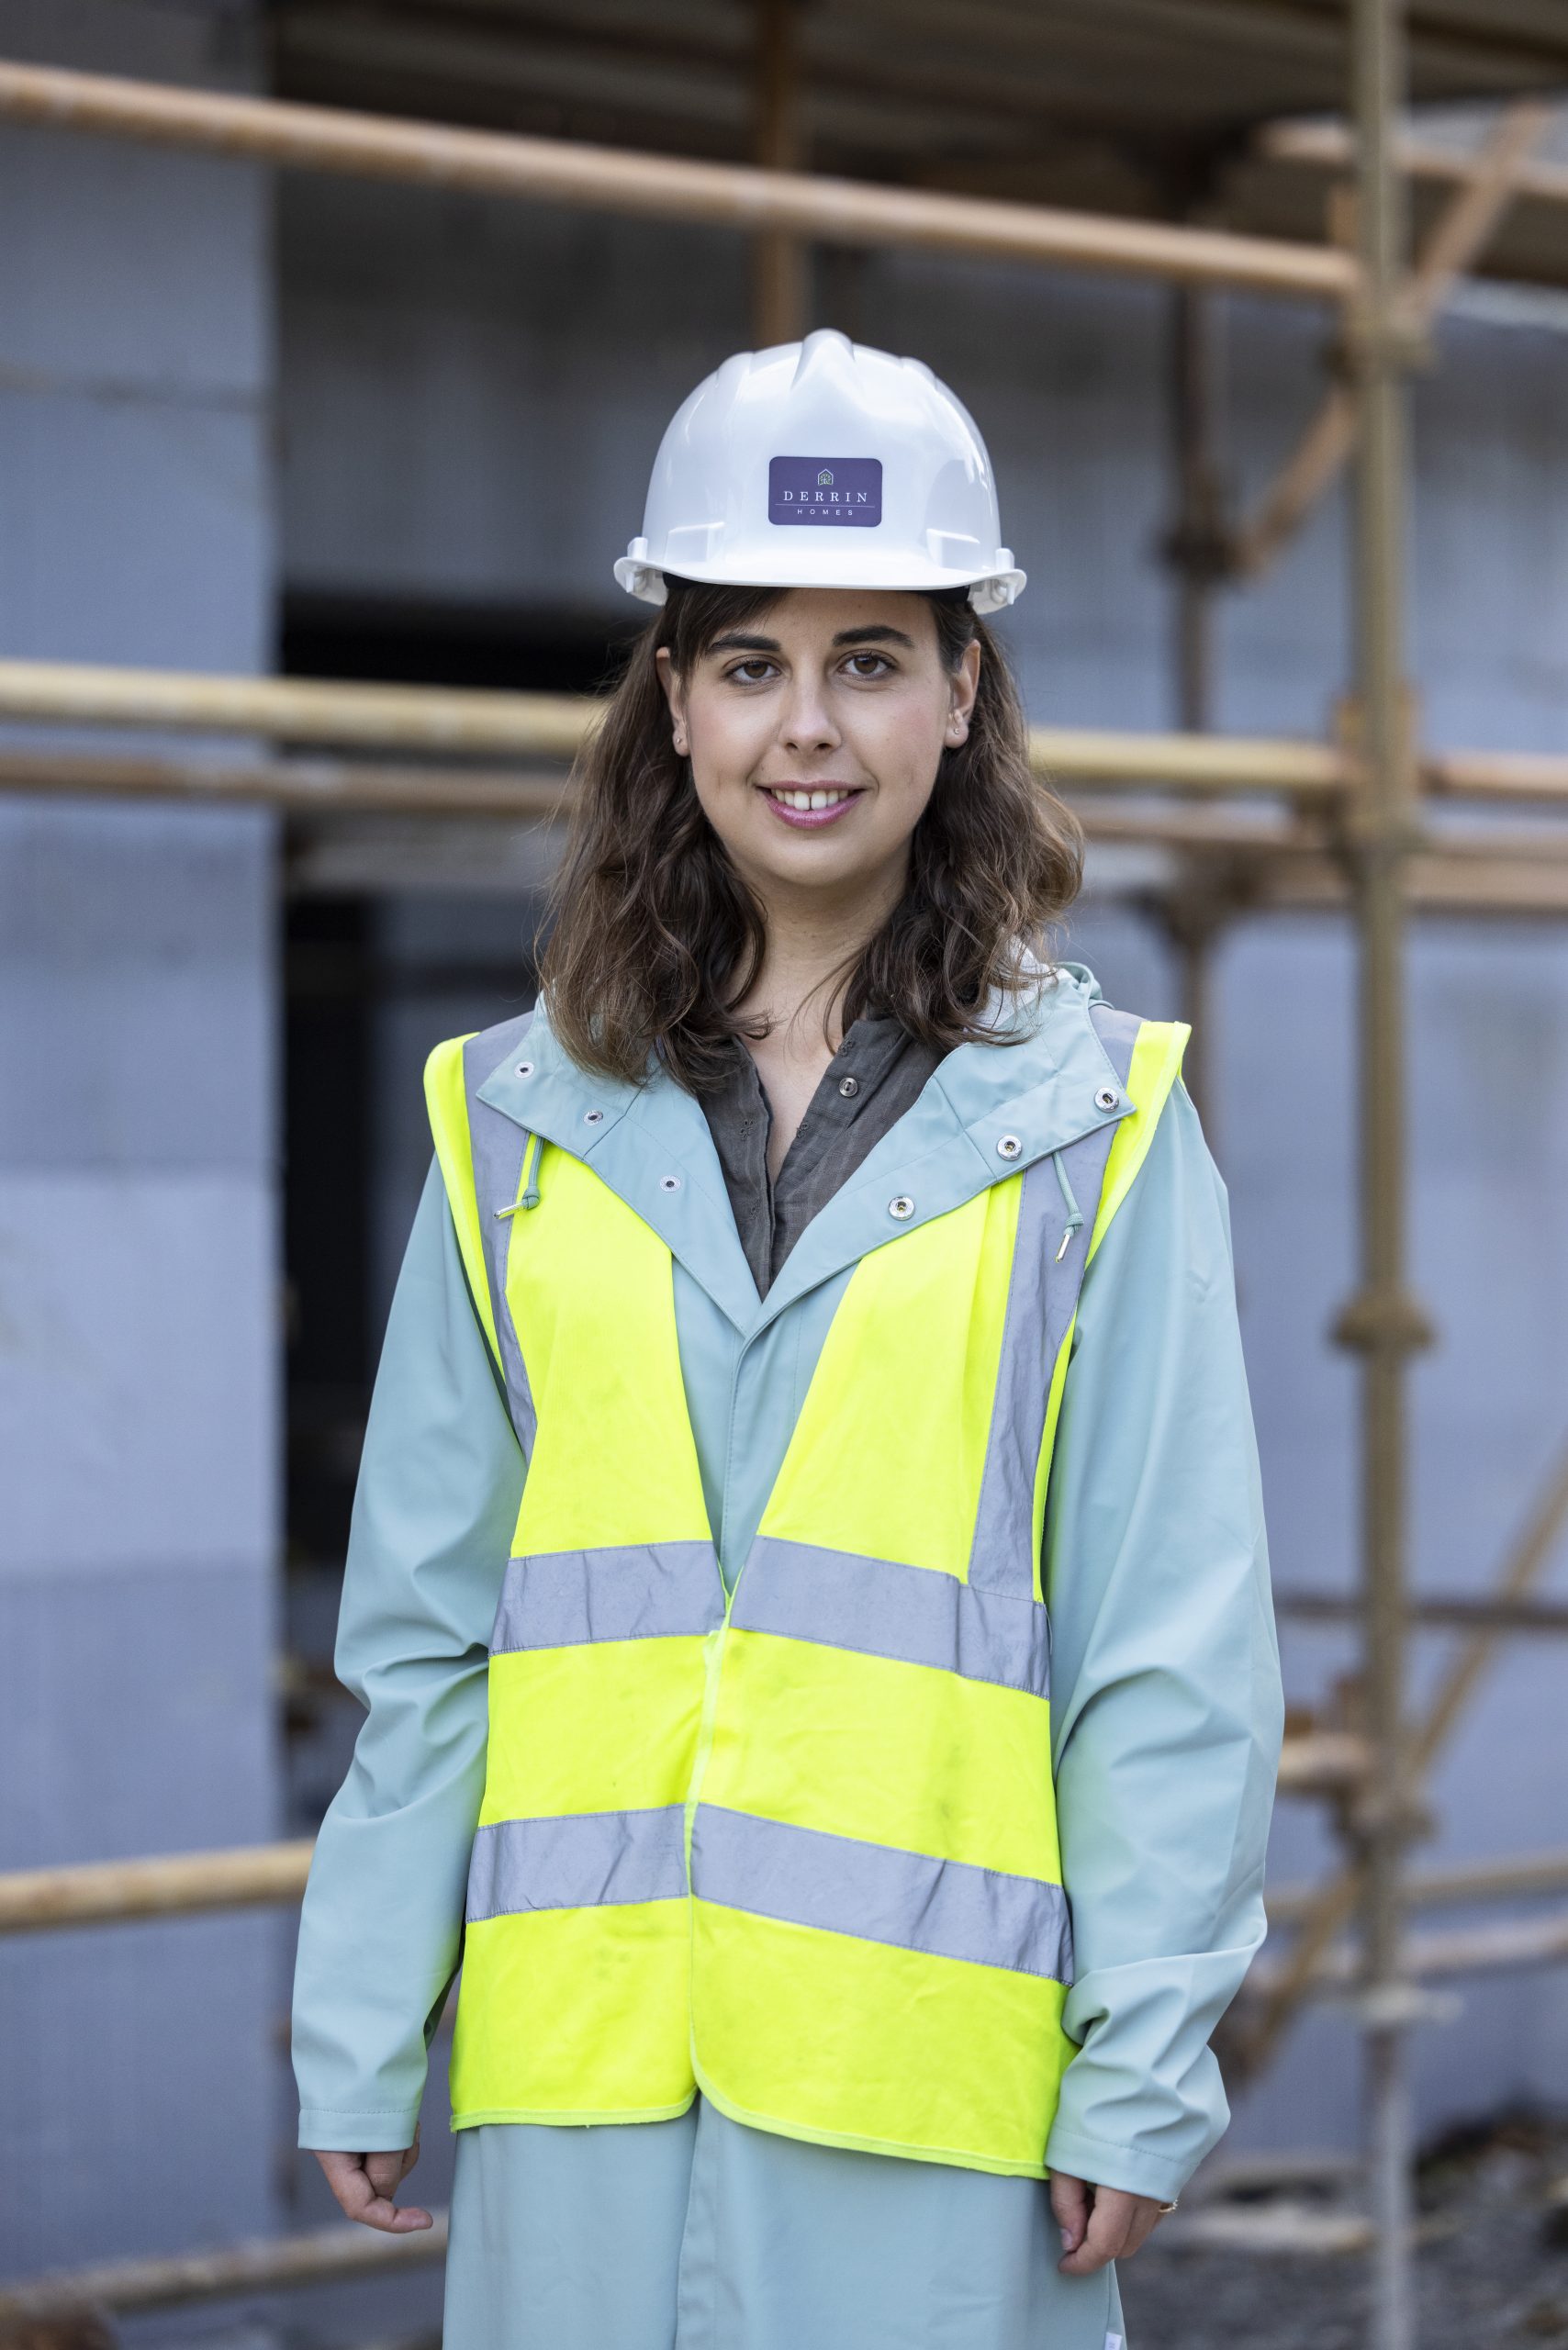 Focus Ireland staff member visits a building site. She is wearing a Hi-vis jacket and a hard protective helmet over her long blue coat. There is a building and scaffolding behind her.